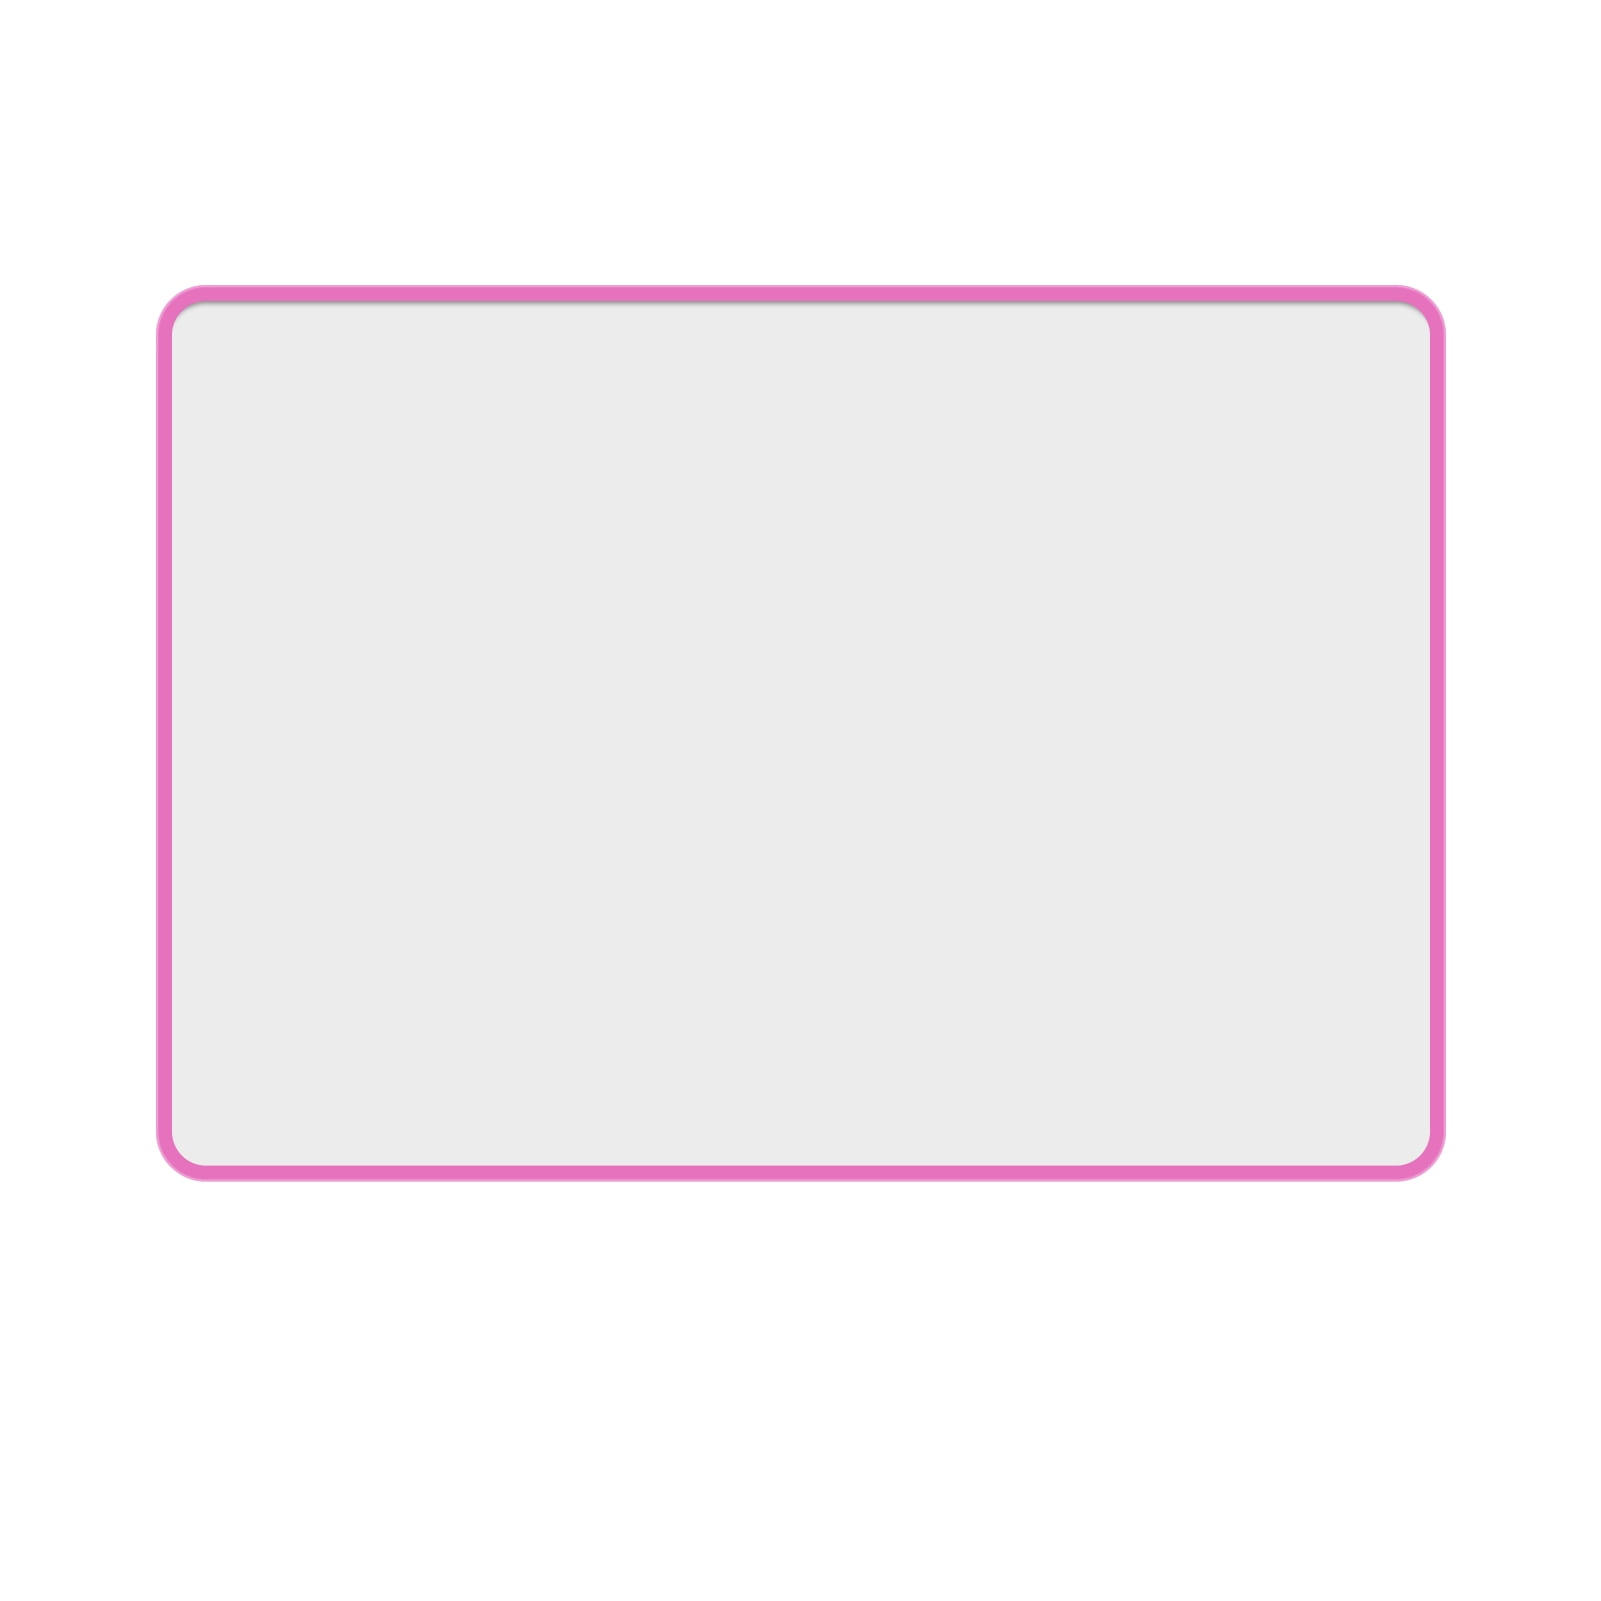 Details about   Chesean Small Dry Erase Board,Portable Magnetic White Board Double-Sided Desktop 